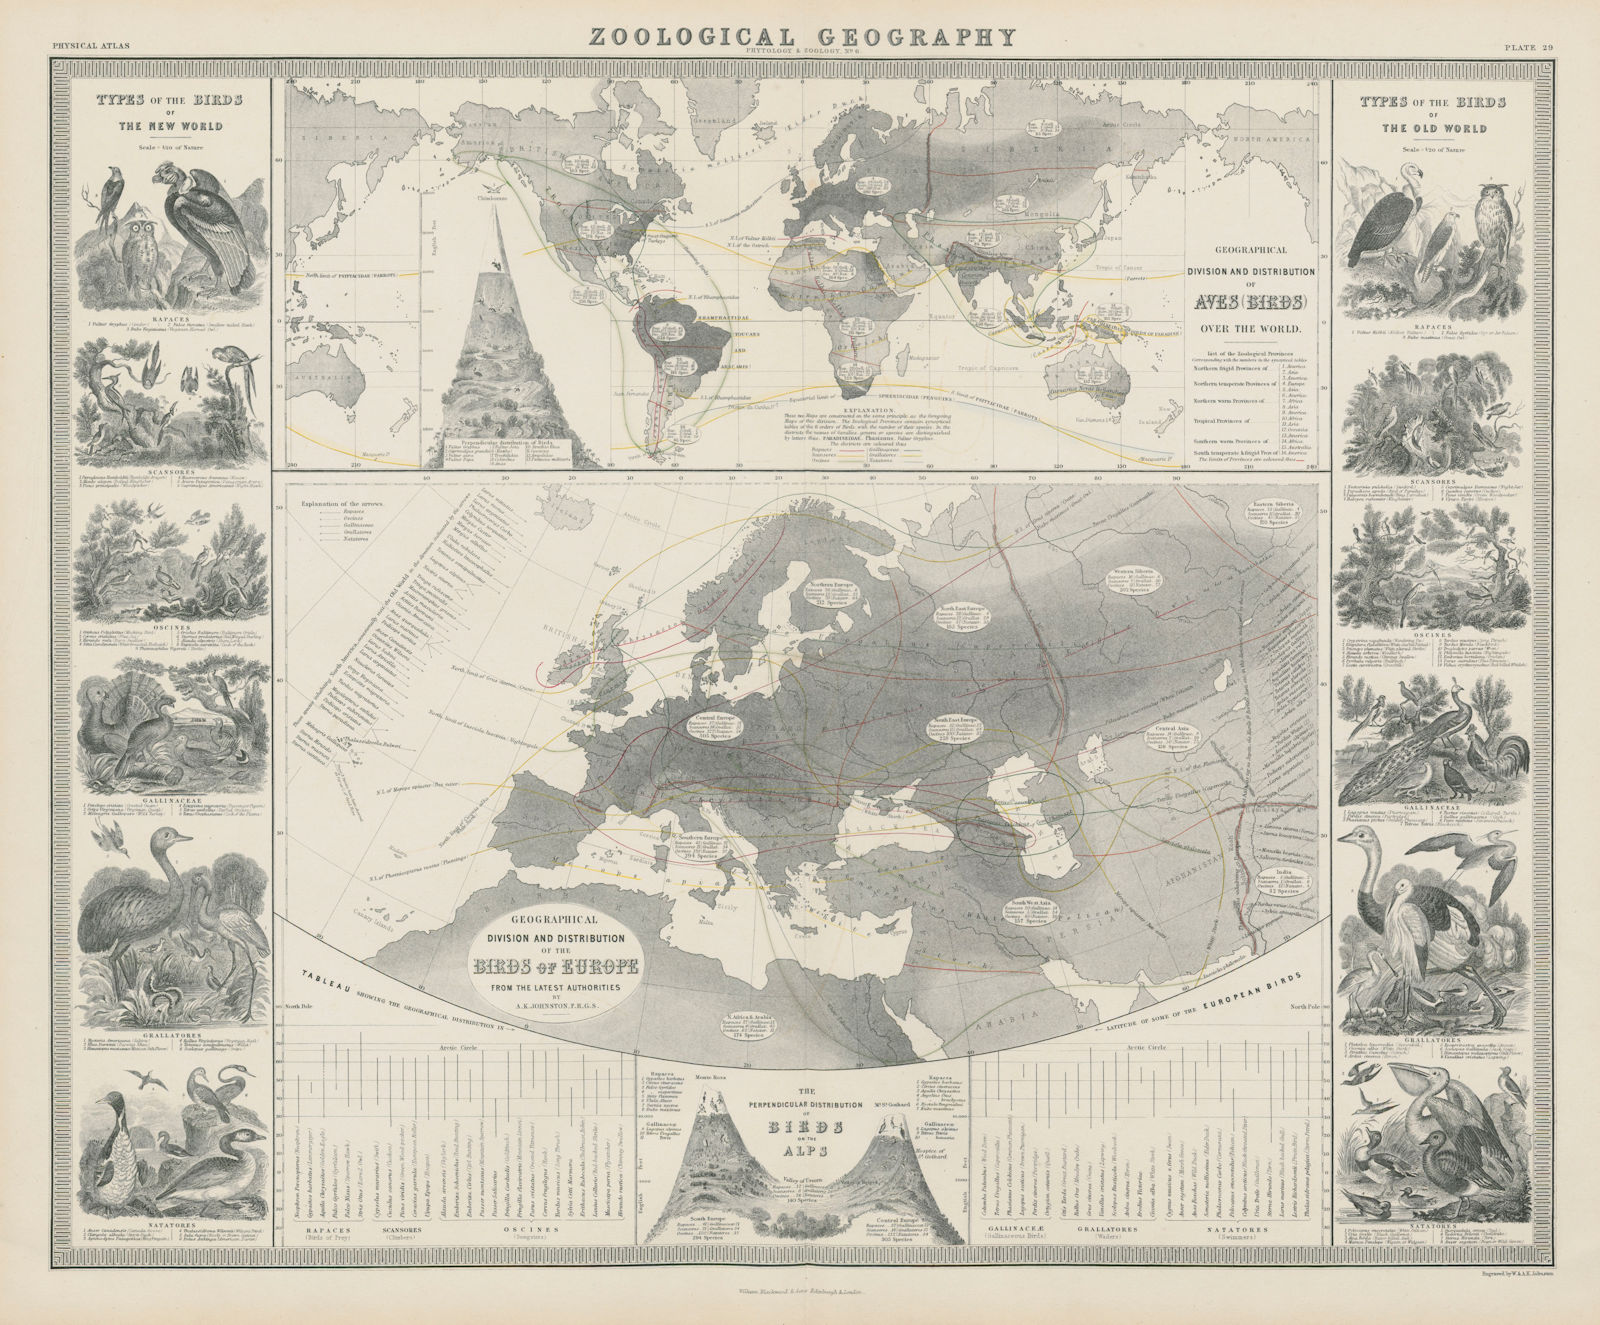 Zoological Geography. Aves (Birds) distribution world & Europe 1856 old map